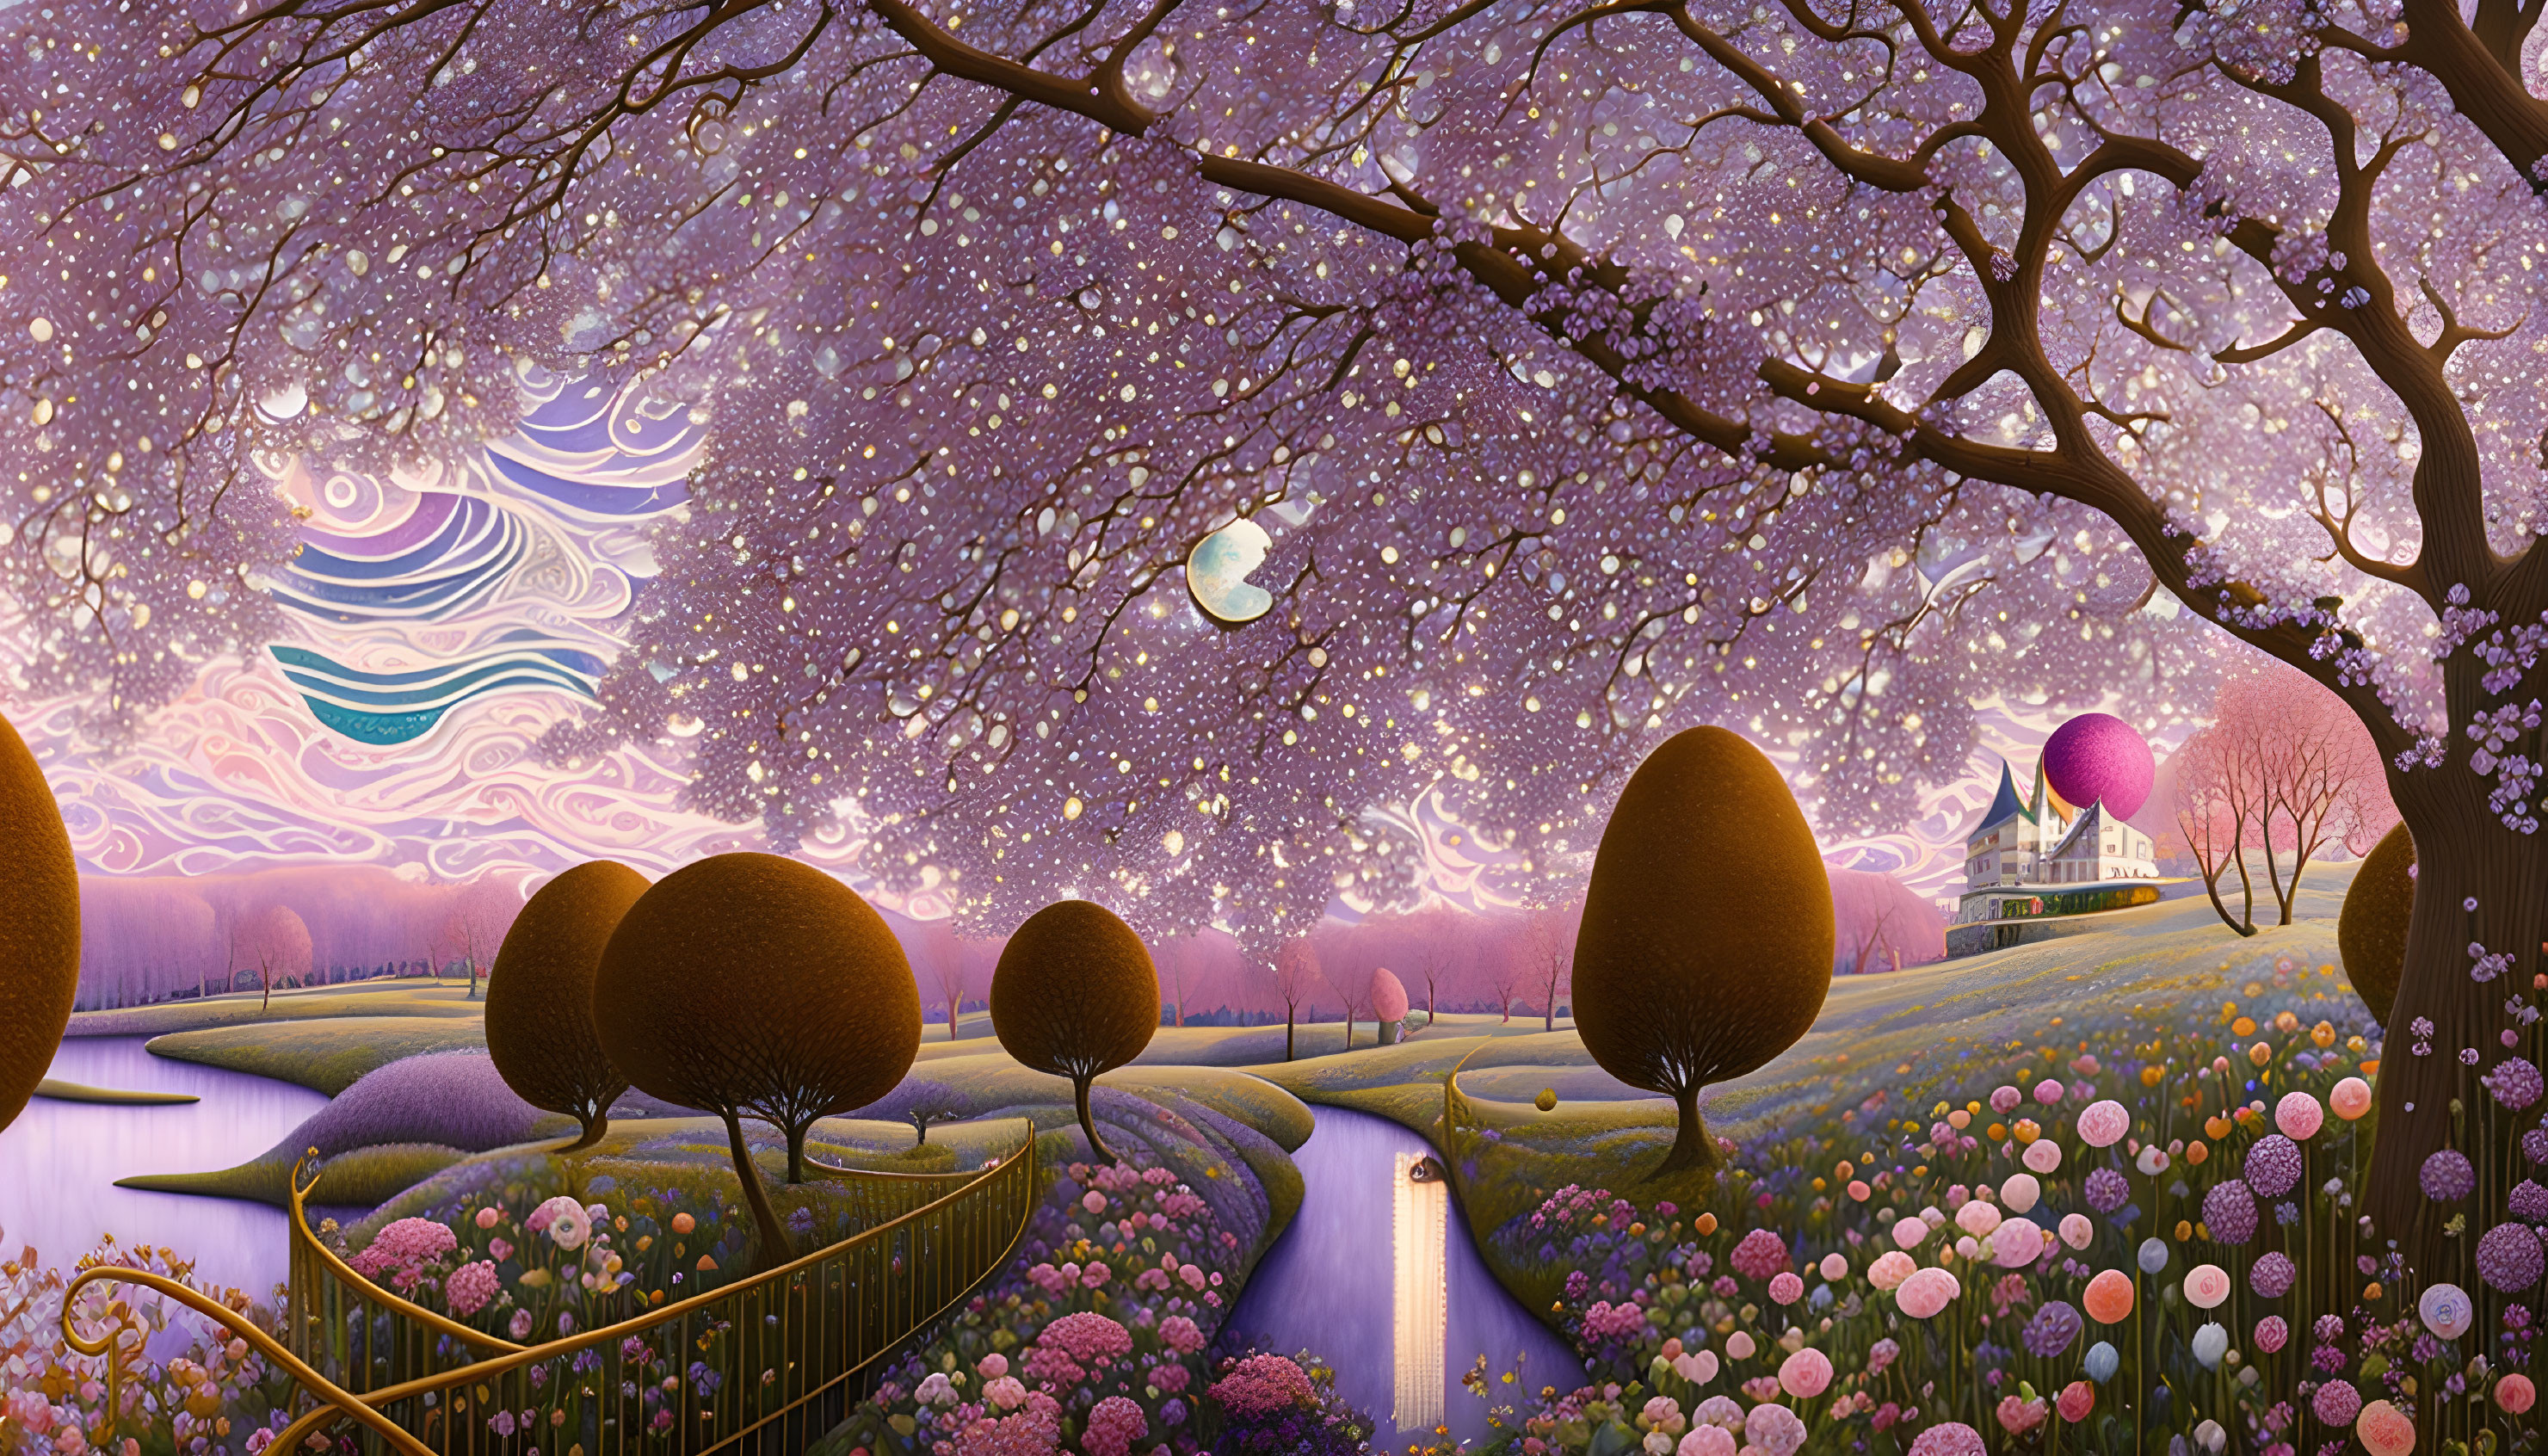 Colorful landscape with cherry trees, purple skies, surreal topiary, and a sparkling river.